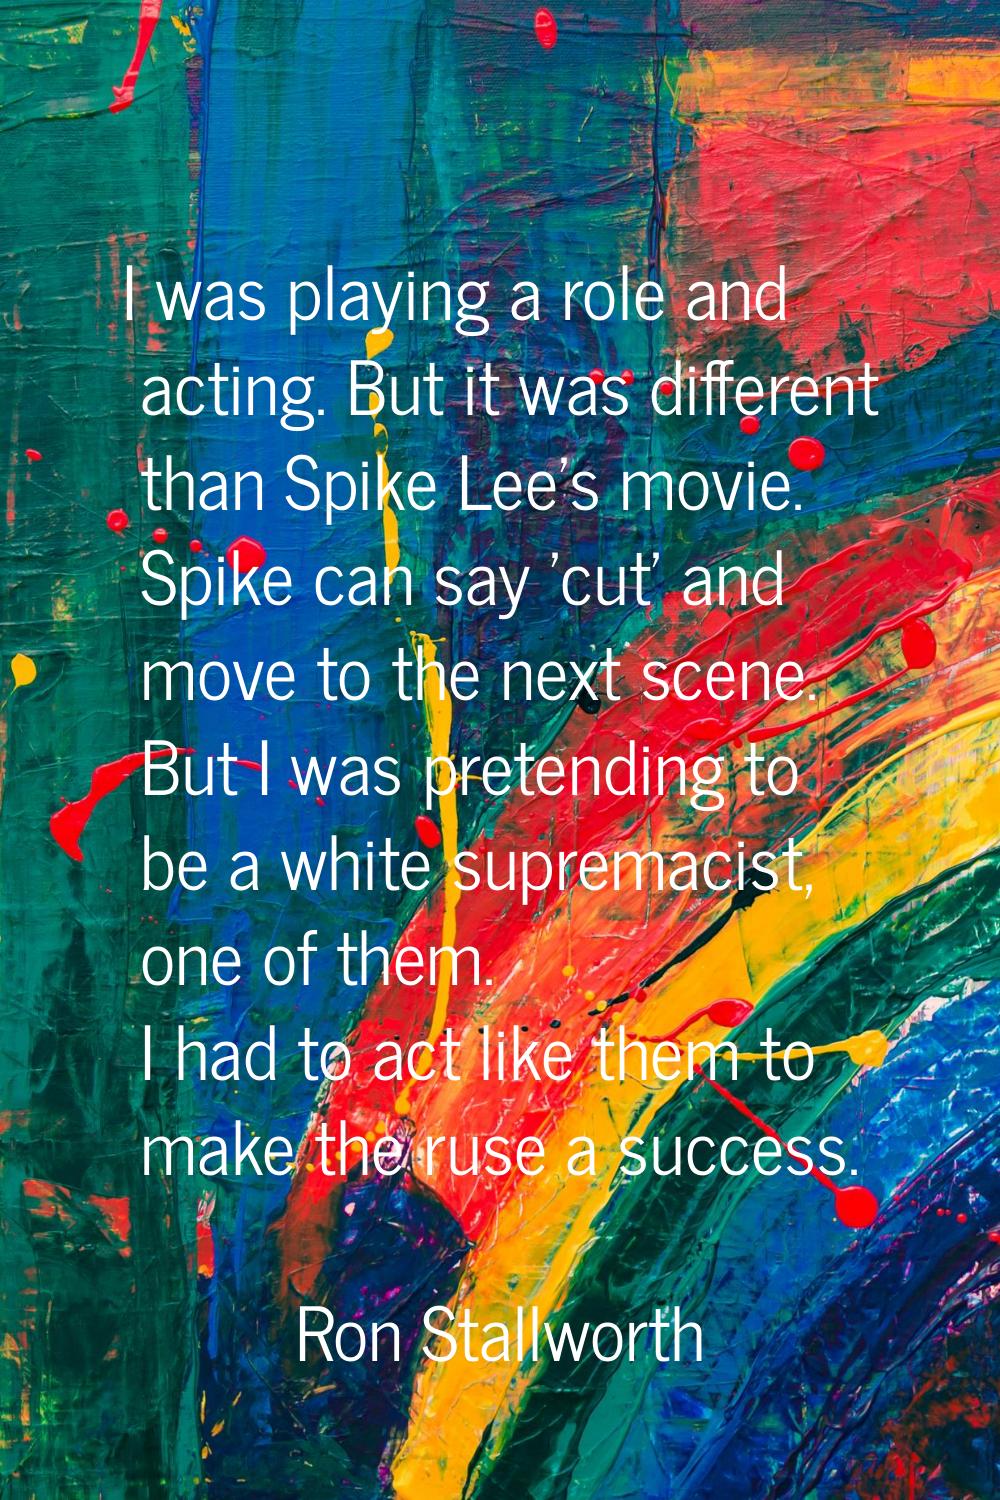 I was playing a role and acting. But it was different than Spike Lee's movie. Spike can say 'cut' a